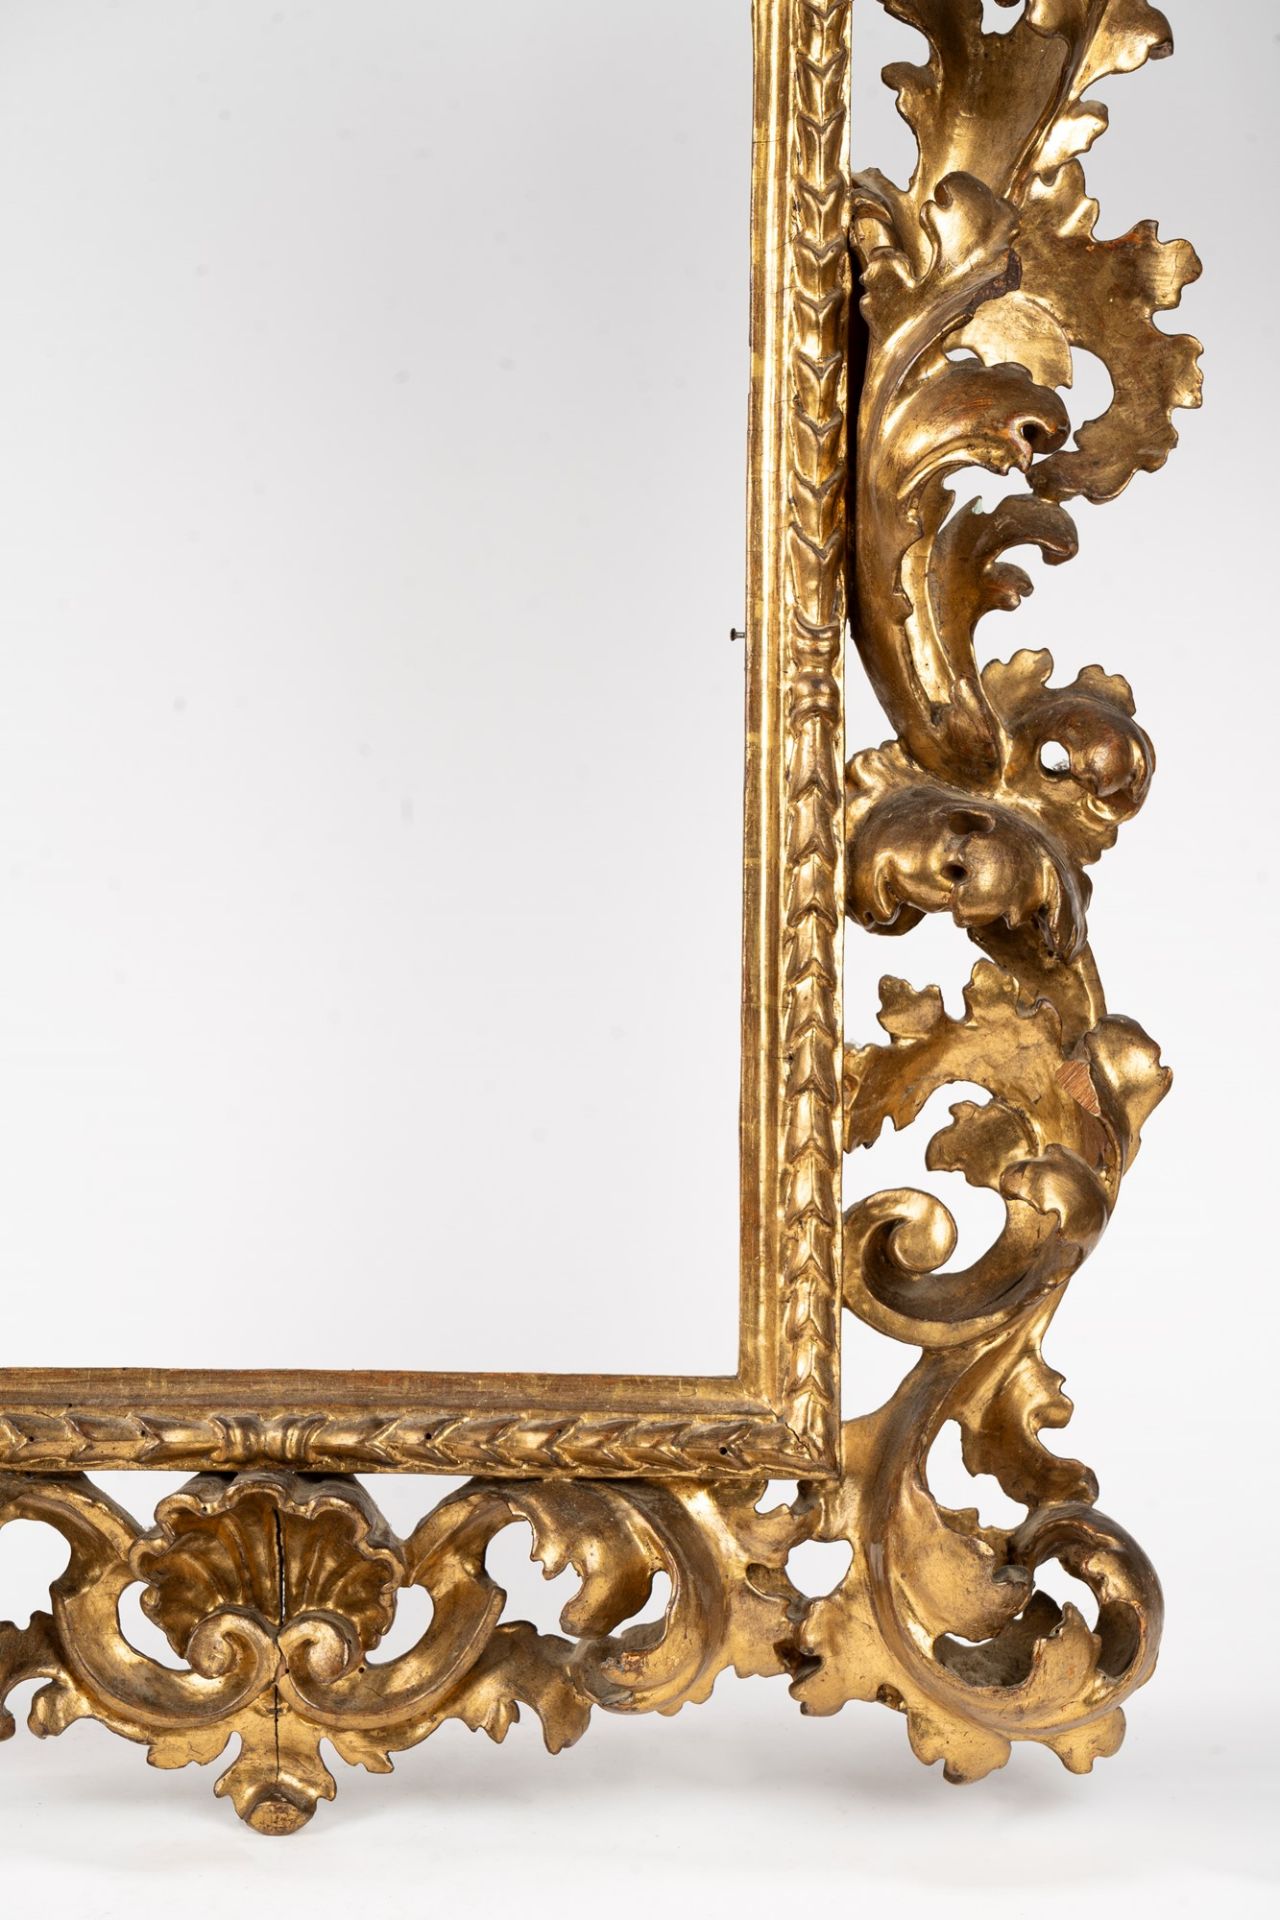 Carved and gilded wood frame, 19th century - Image 7 of 7